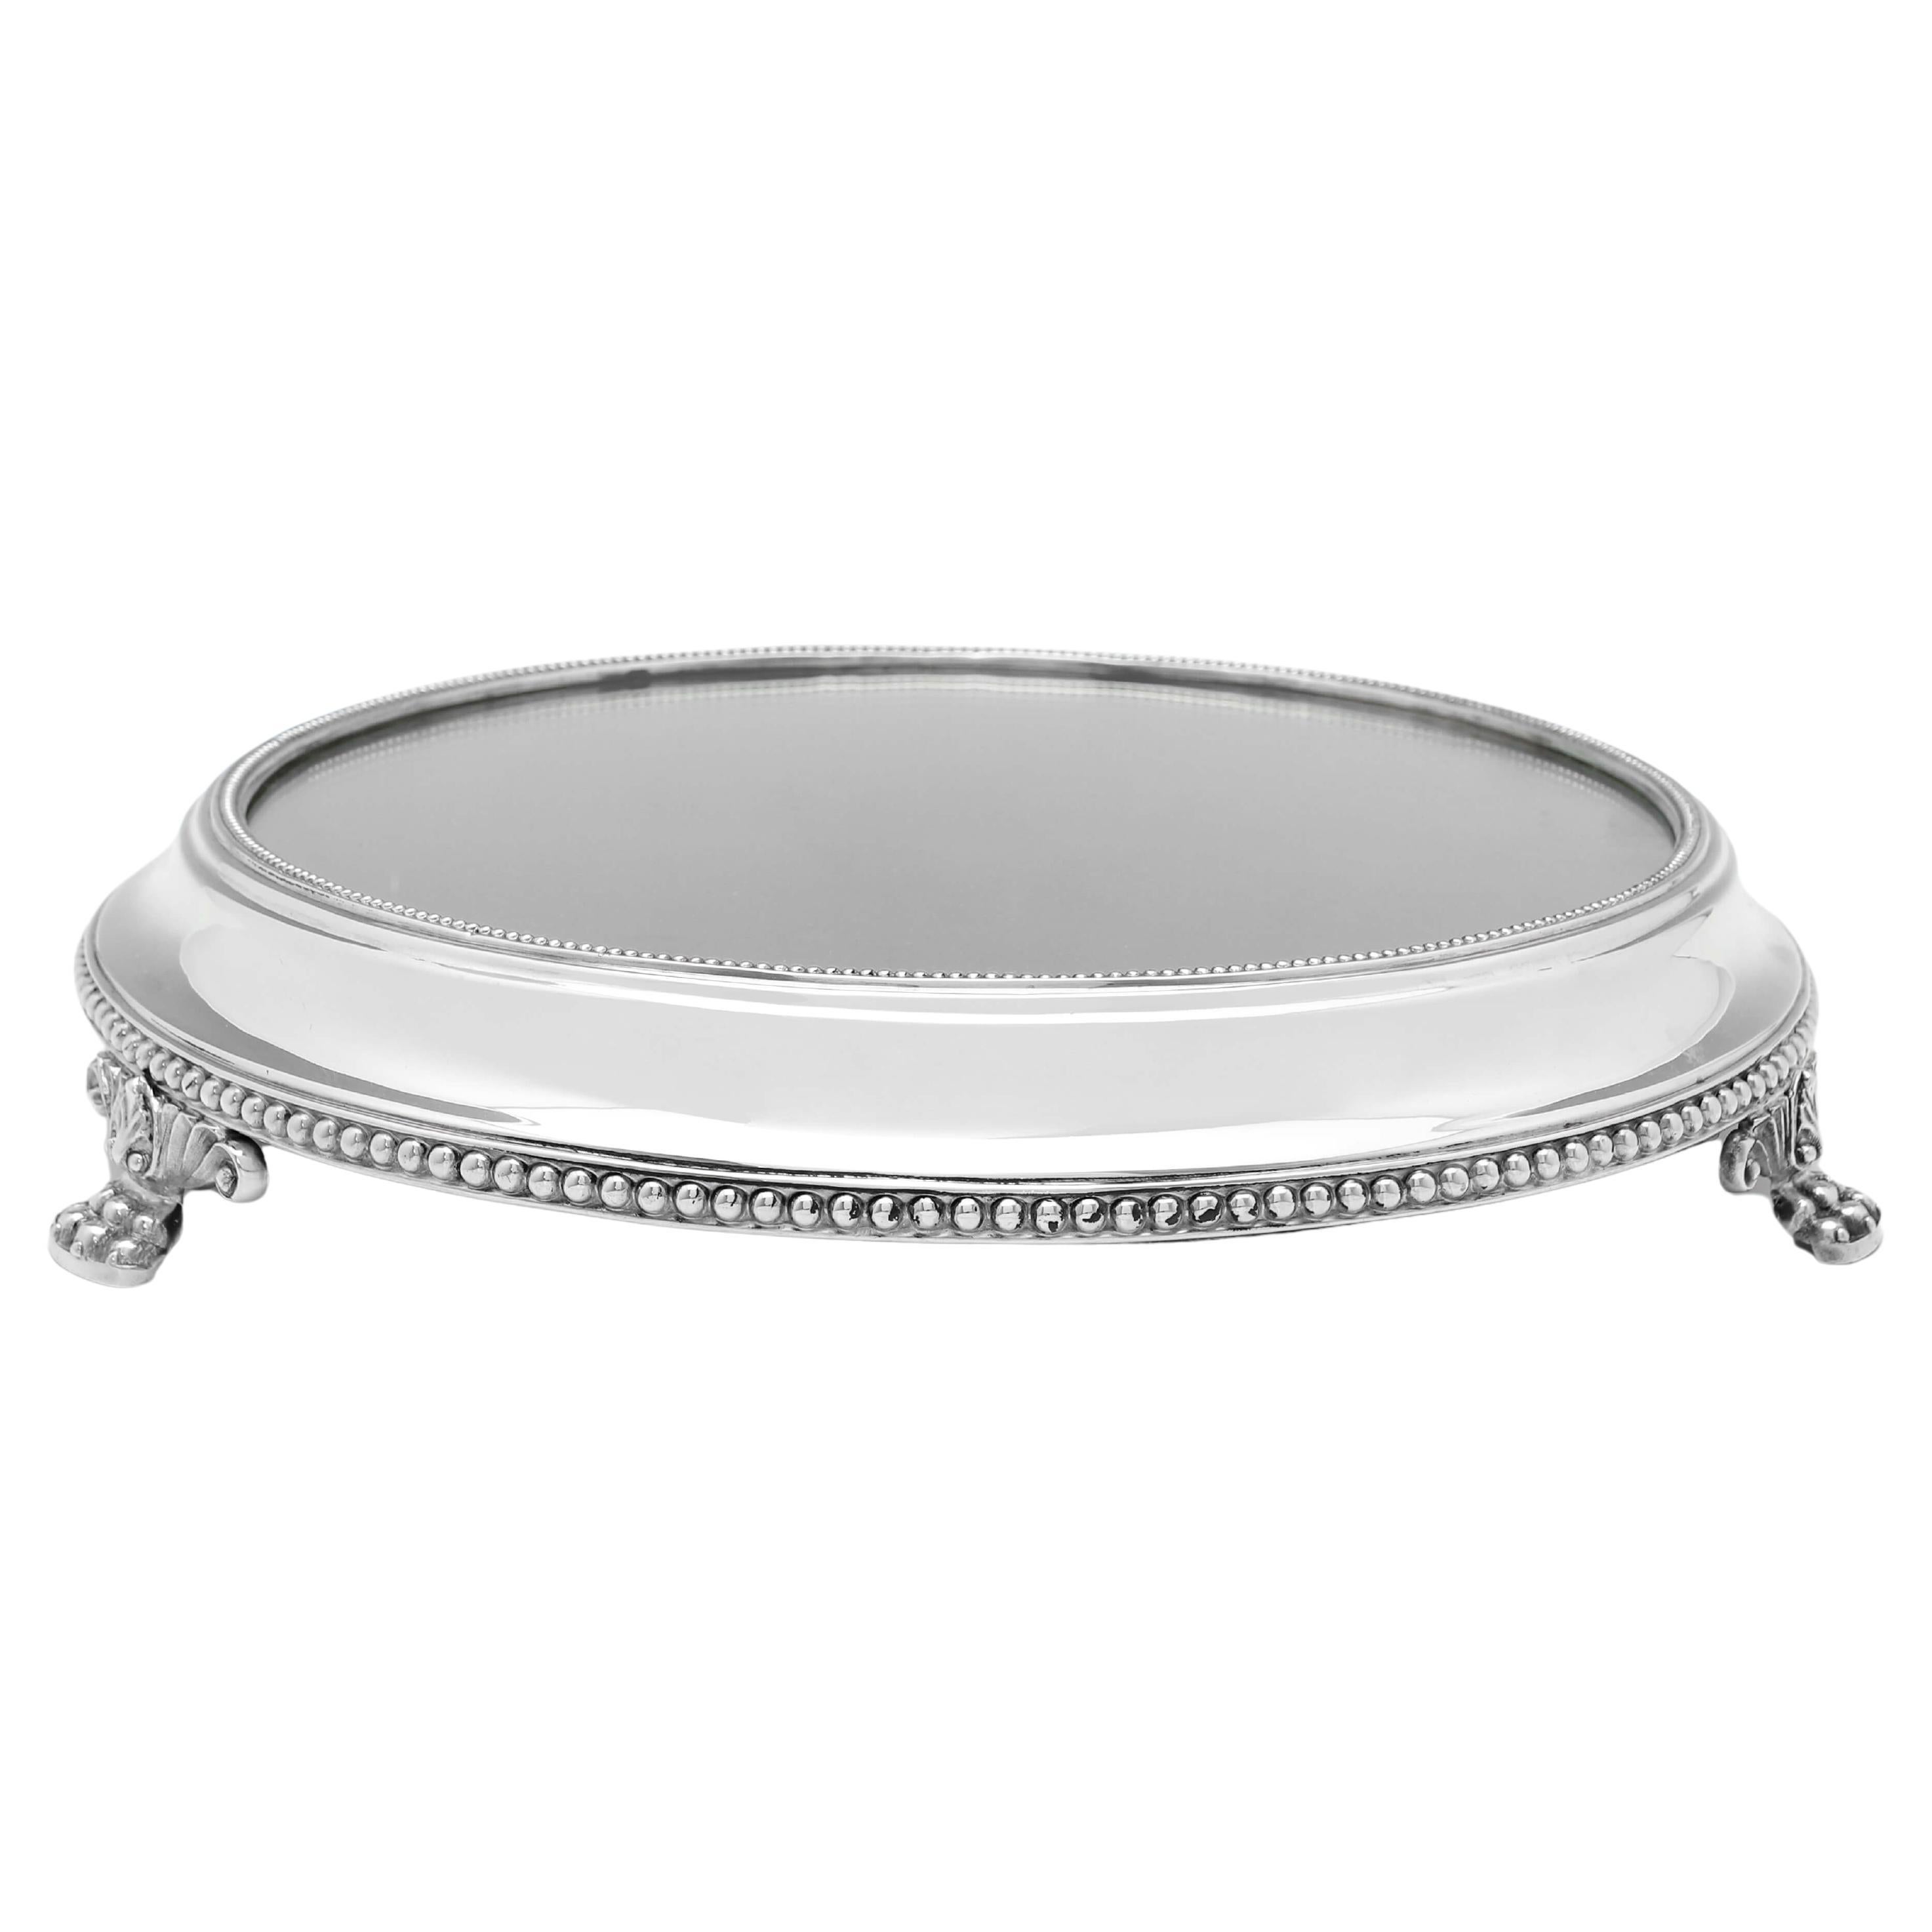 A Victorian Sterling Silver Mirrored Plateau - Made in Sheffield in 1885